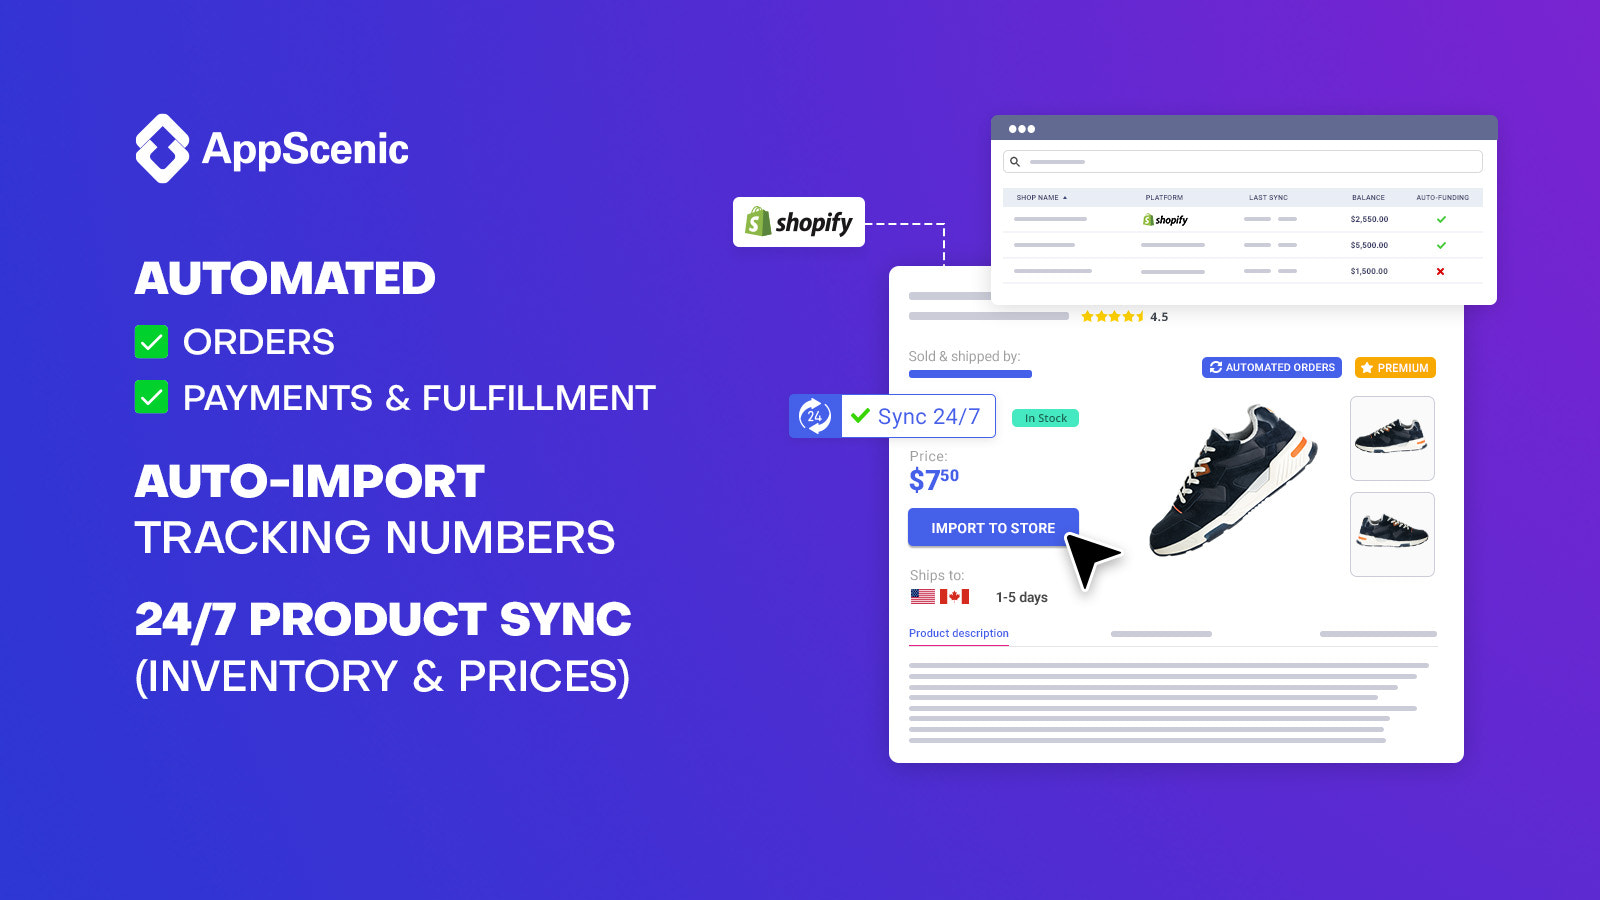 Dropshipping automation: automated orders, payments, tracking